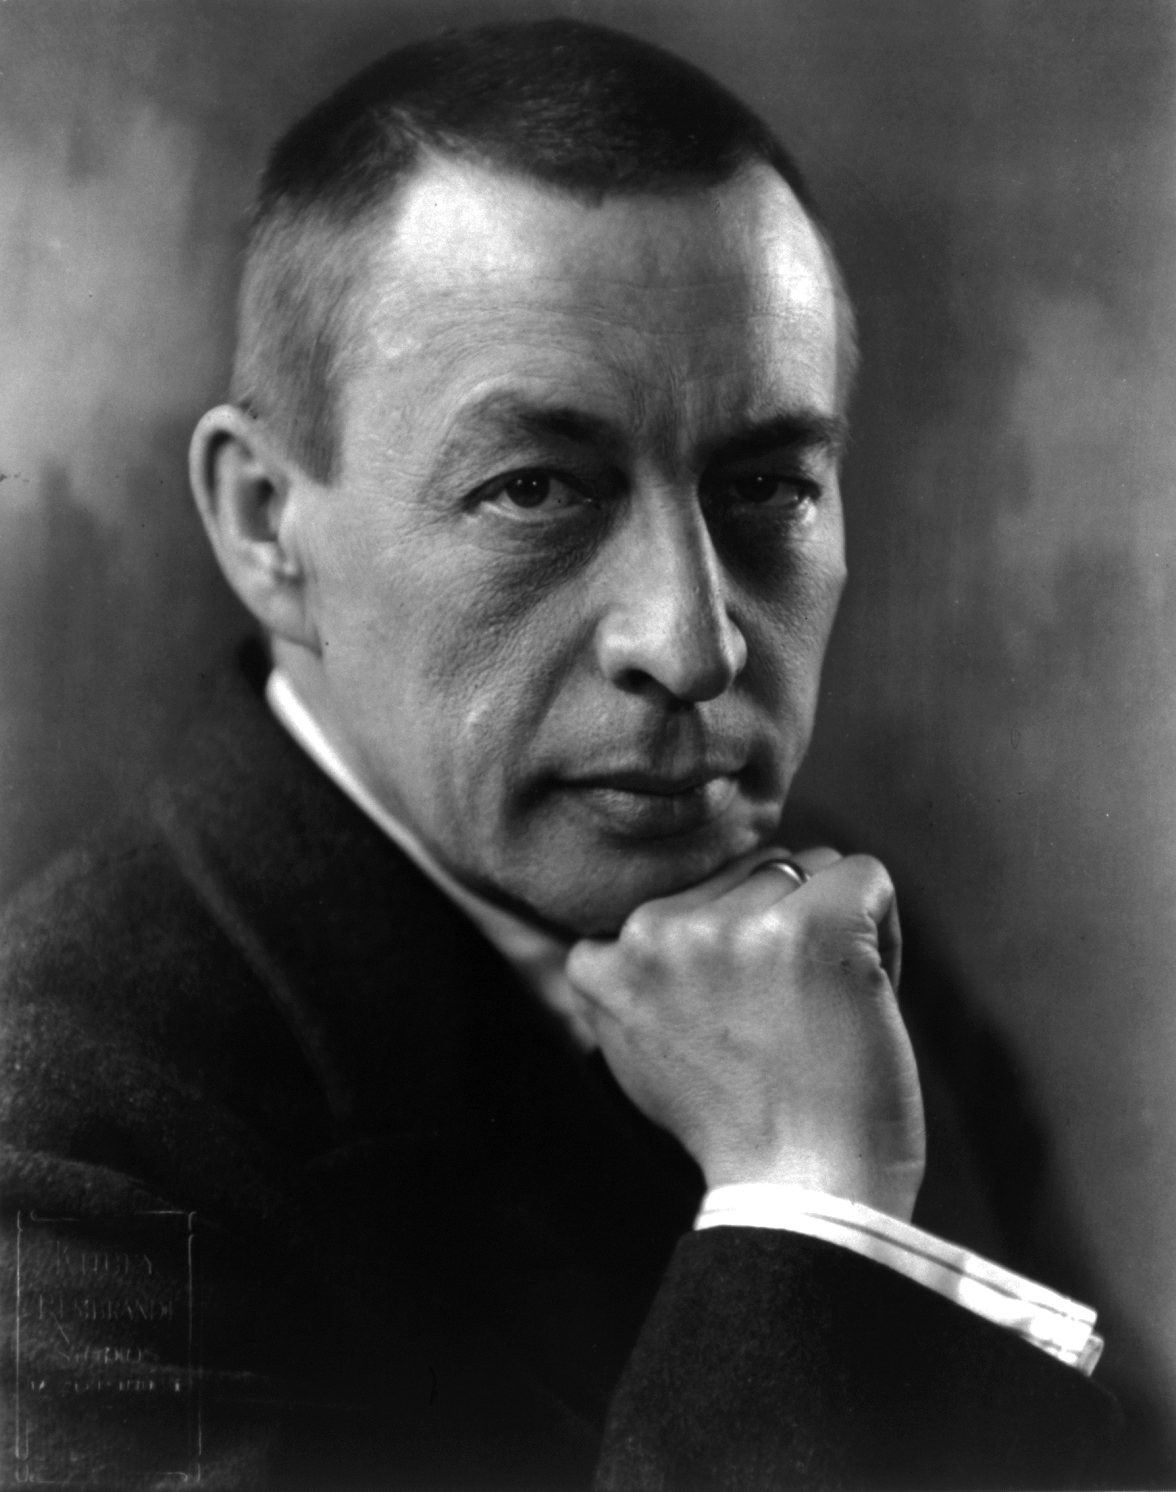 Pianist, composer and conductor Sergei Rachmaninoff (1873-1943) in 1921 (Library of Congress)